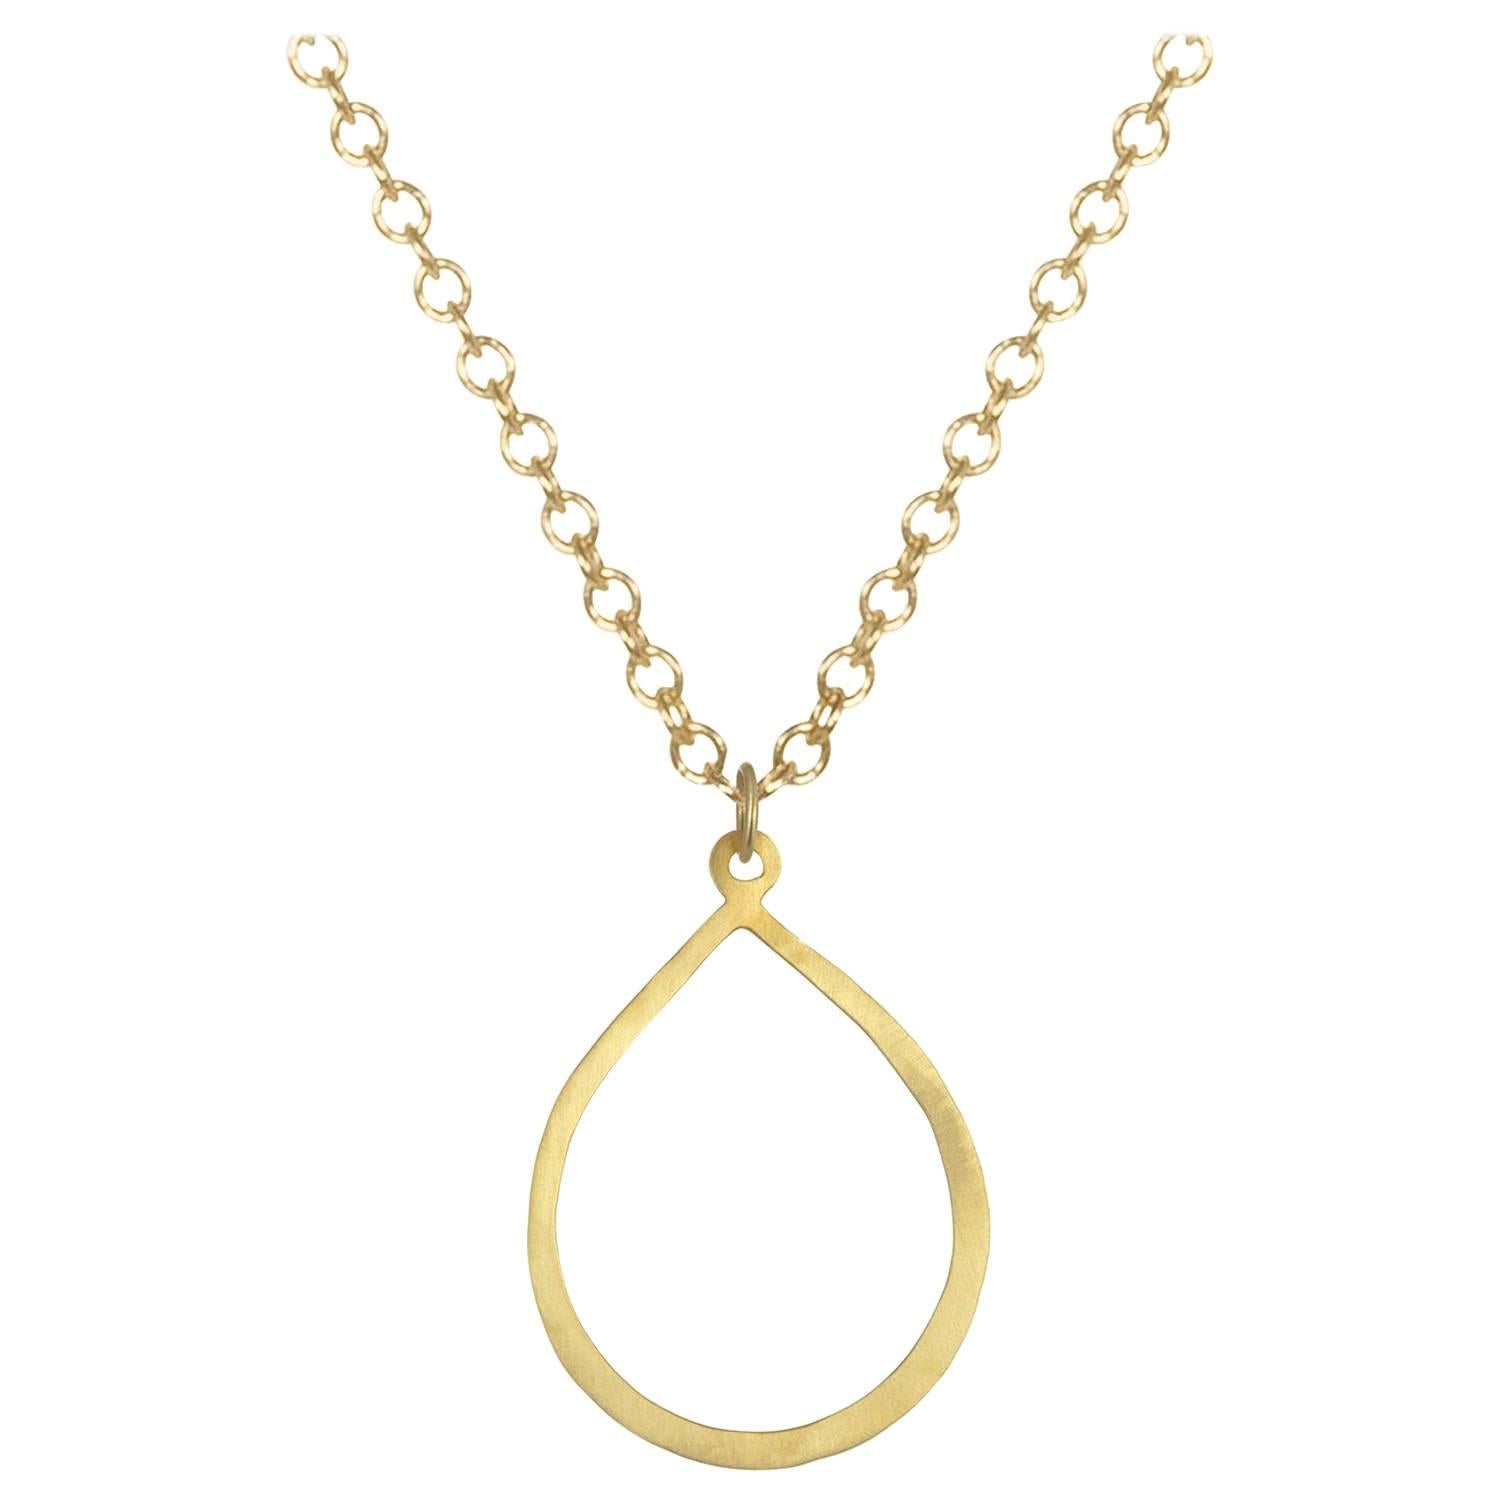 Faye Kim 18k Gold Planished Teardrop Pendant on Cable Chain